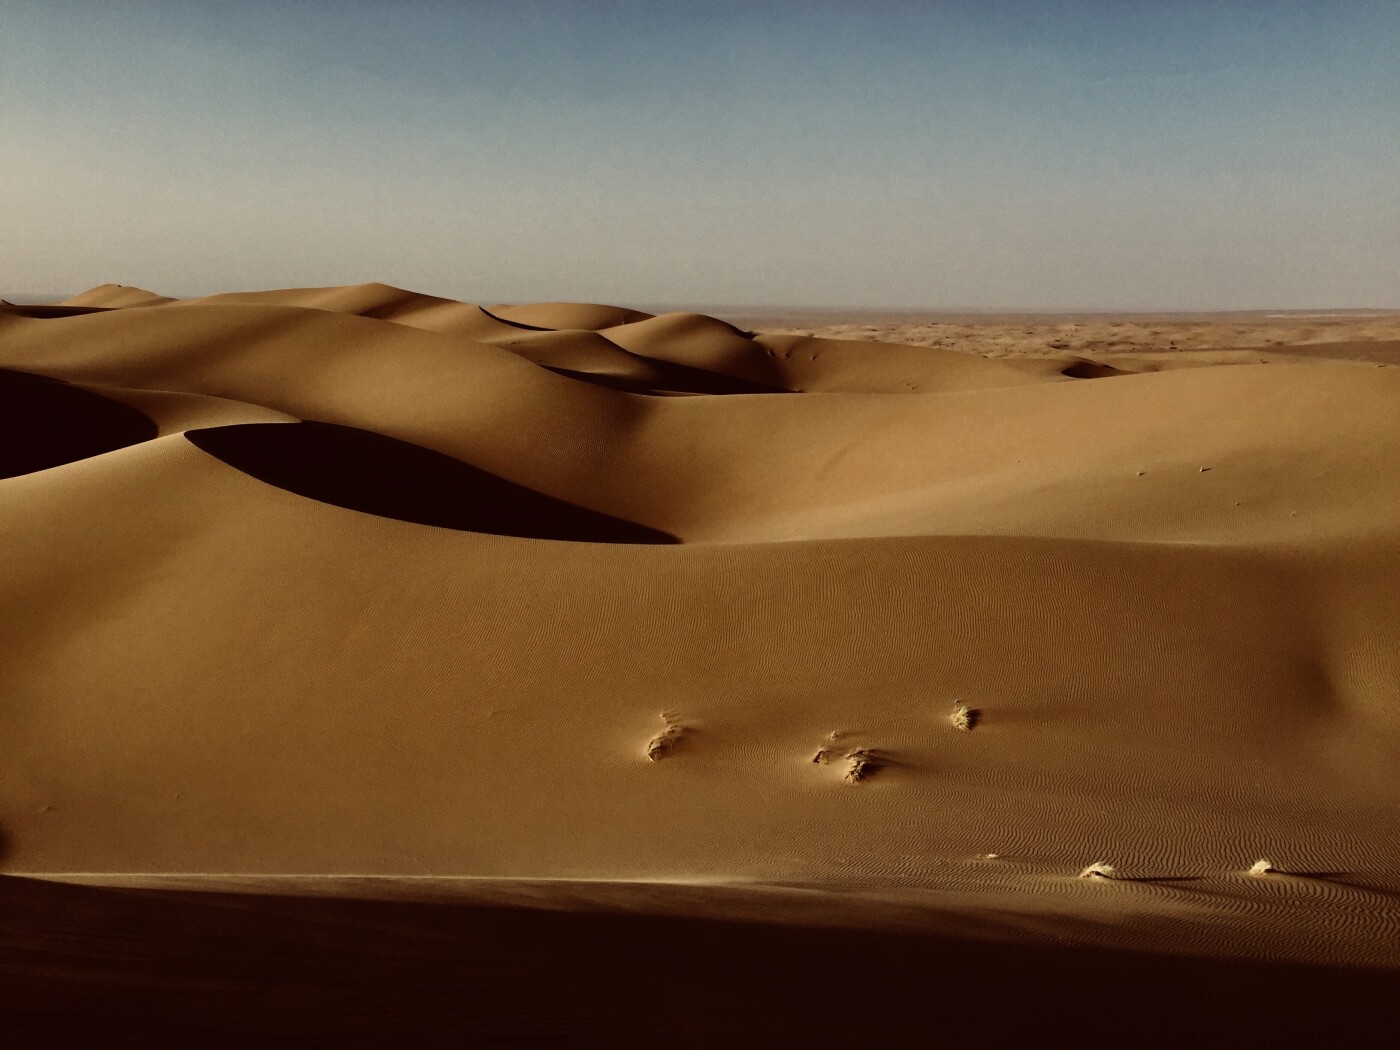 A sea of sand _ 02

Iran’s central desert, Dashte- kavir is an incredible place. In one of the bor...